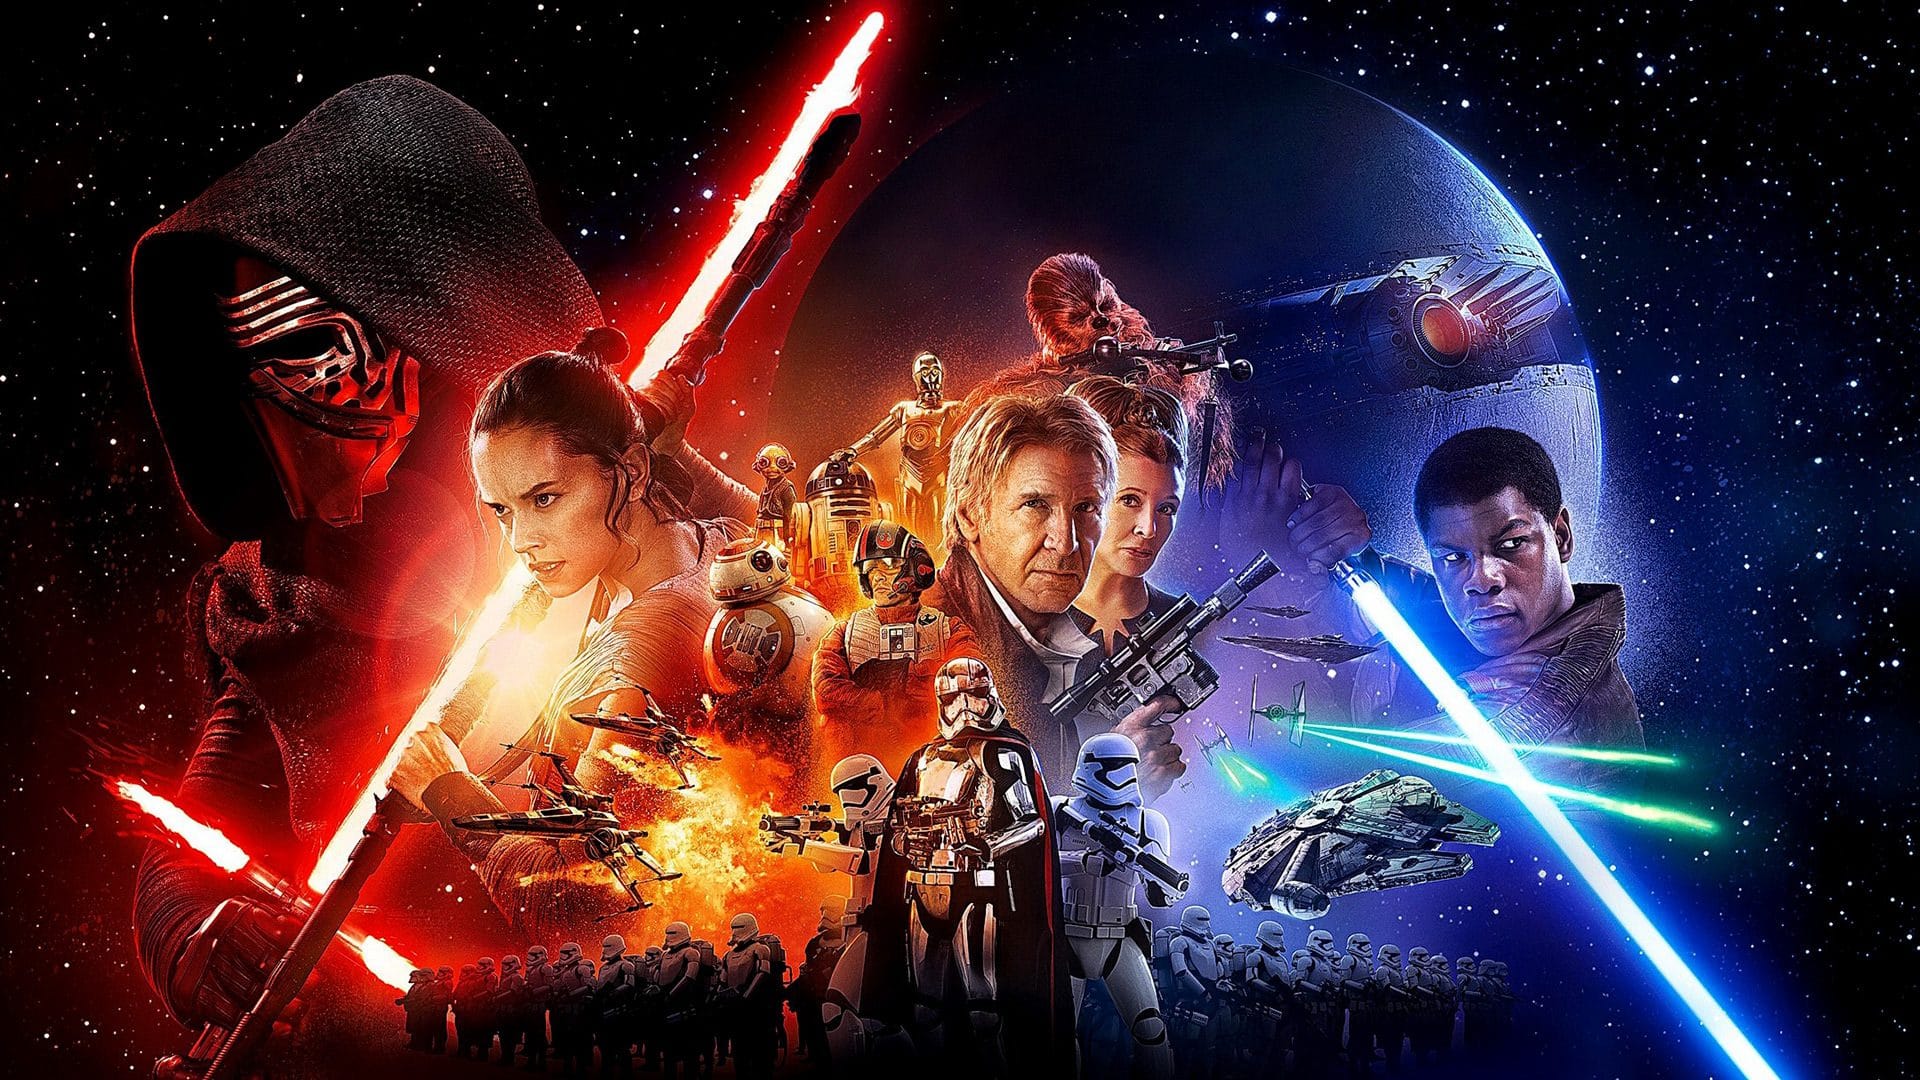 A movie called Star Wars draws in a lot of young people due to its entertaining themes